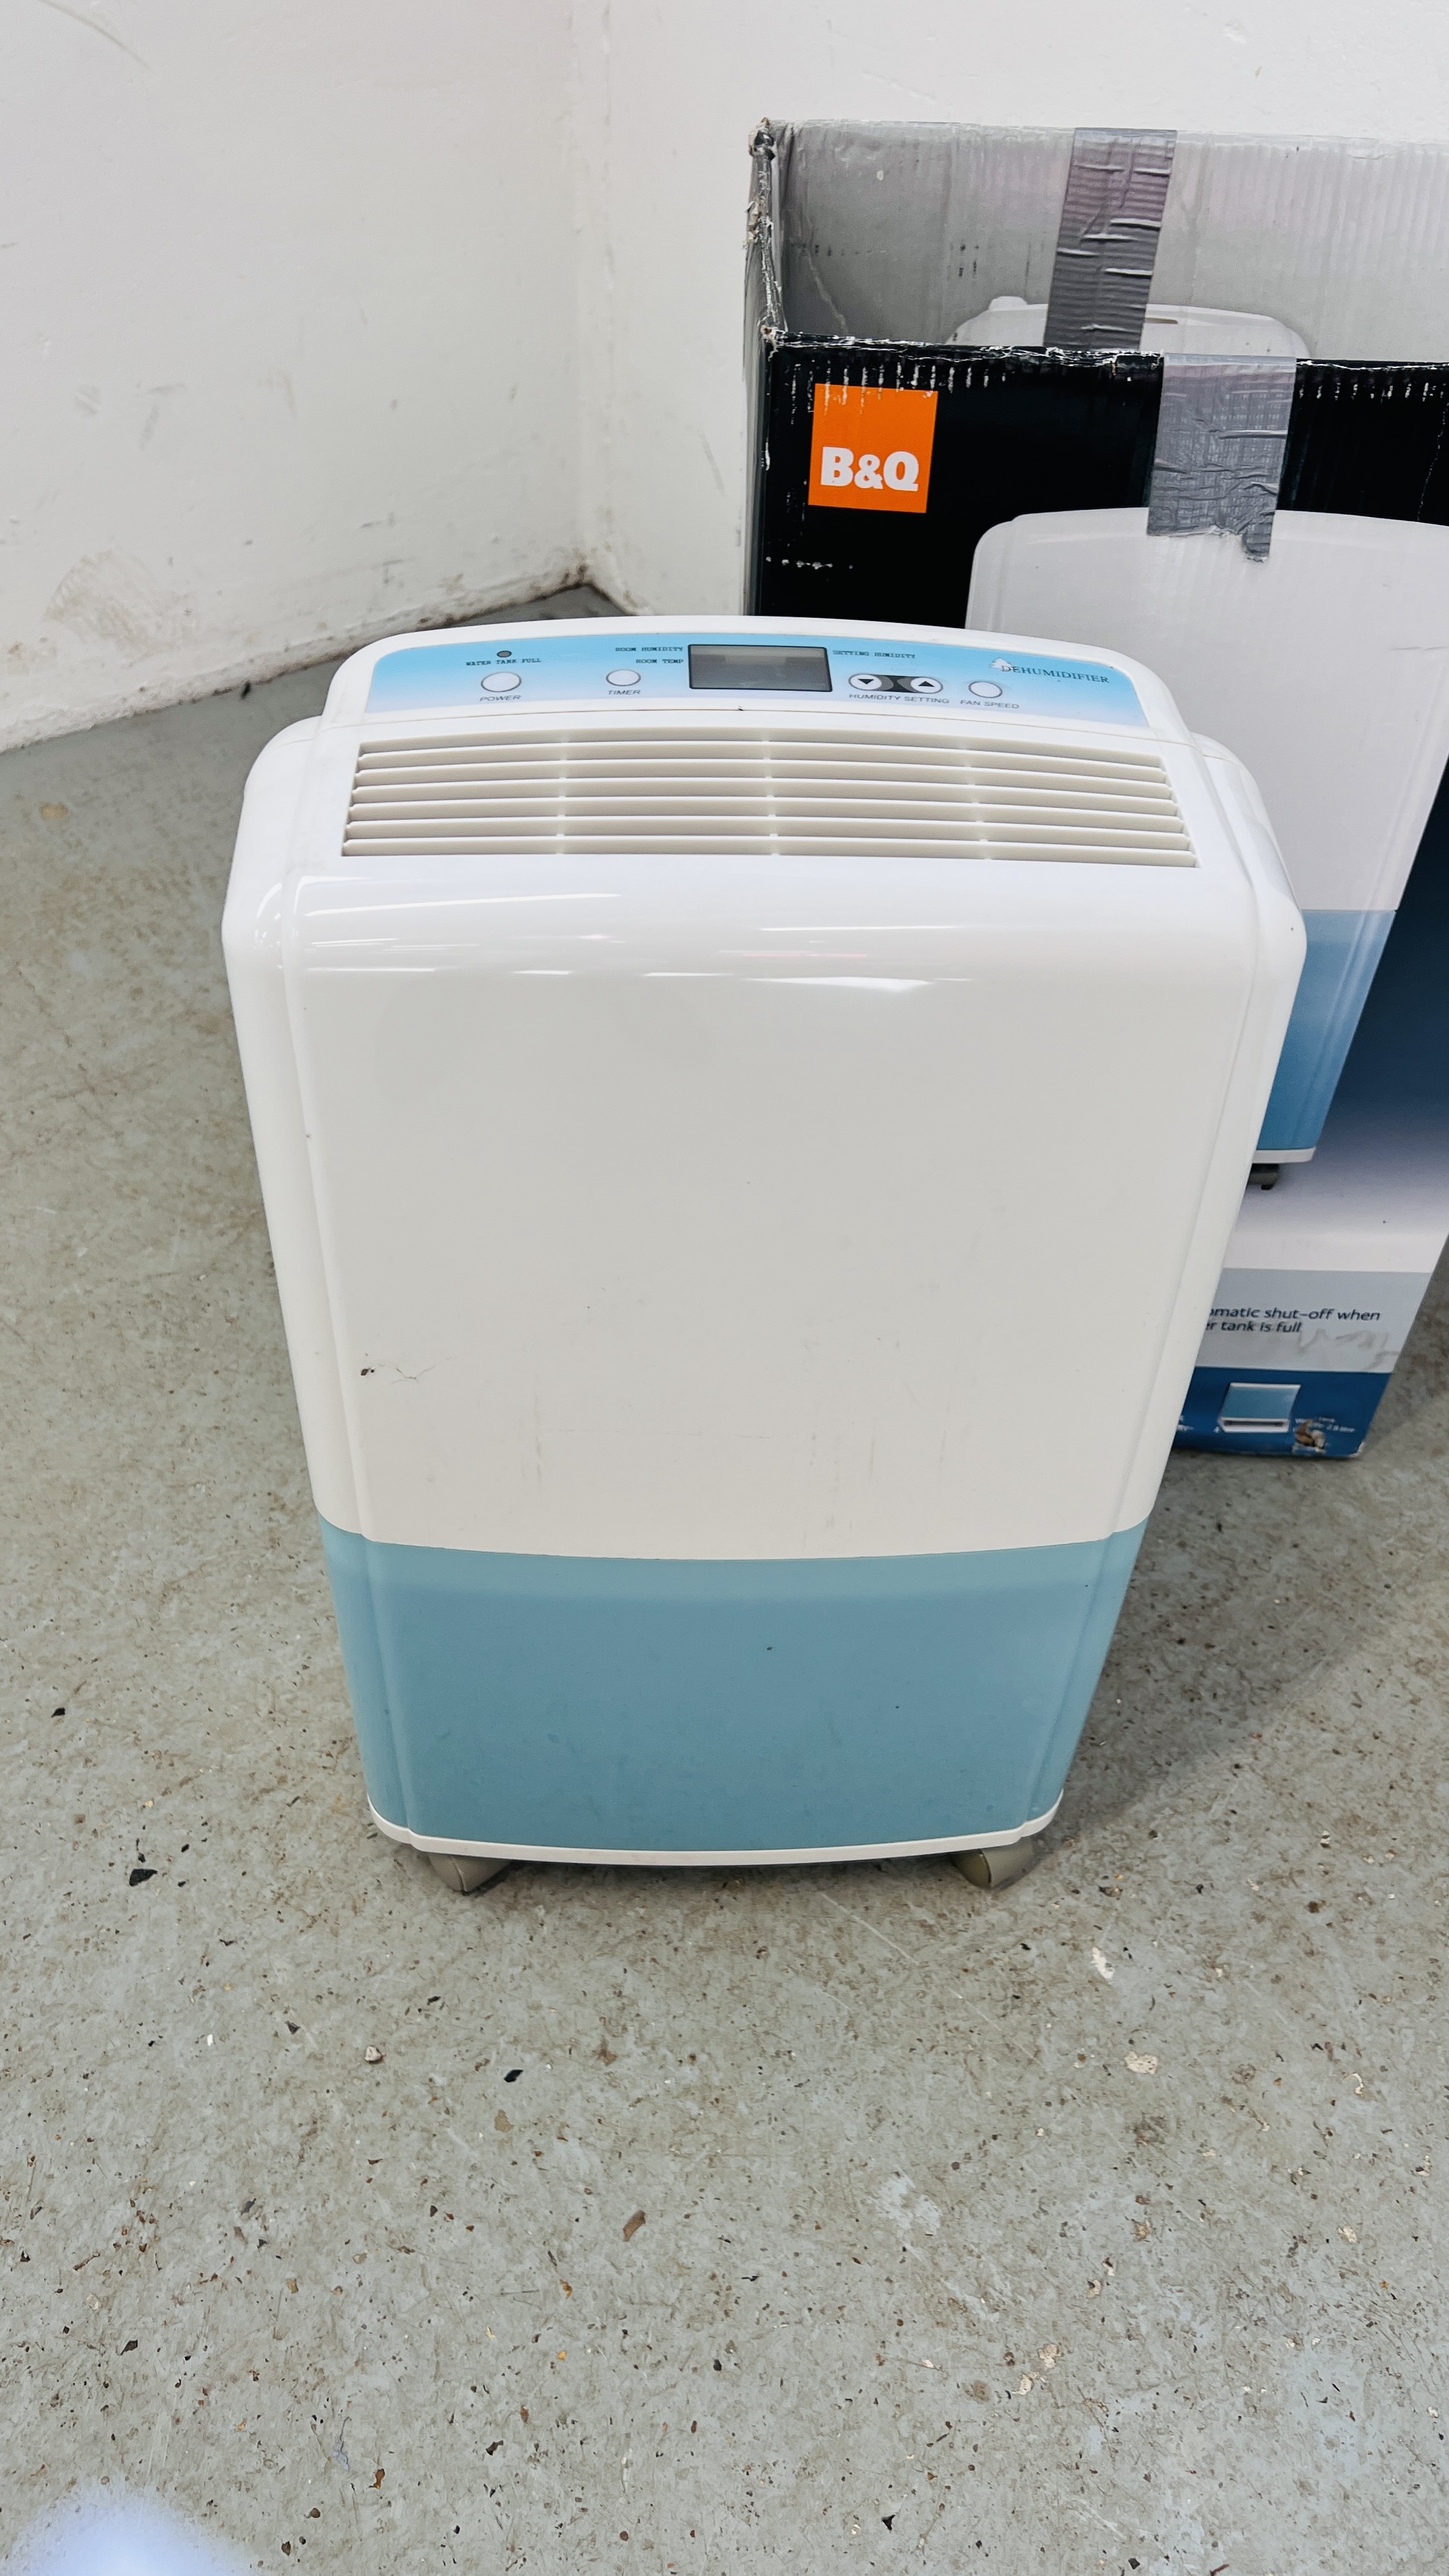 A 16L DEHUMIDIFIER ALONG WITH ORIGINAL BOX - SOLD AS SEEN. - Image 2 of 5